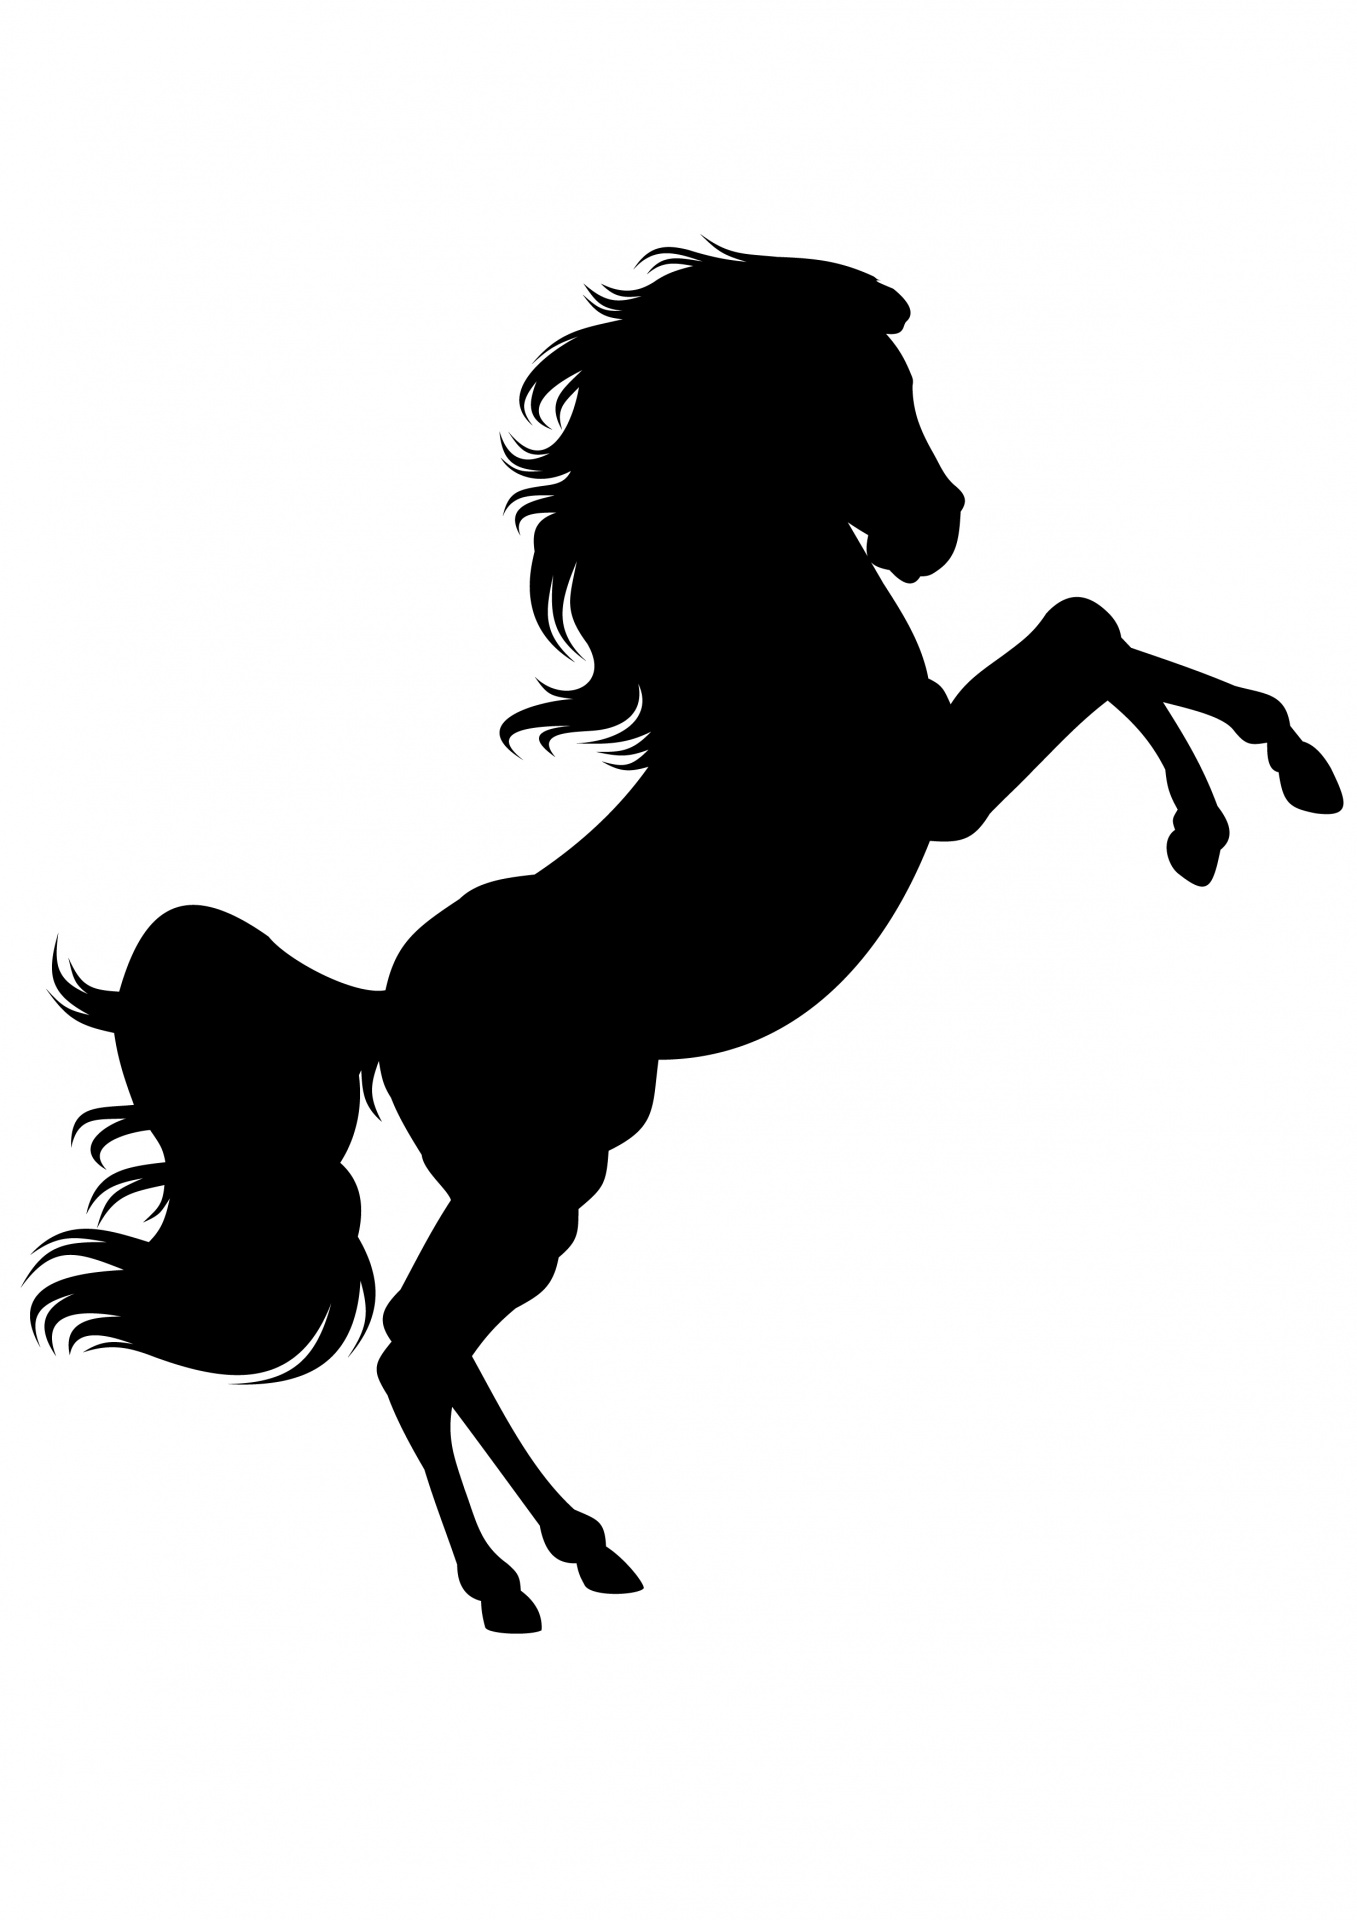 Horse Rearing Black Silhouette